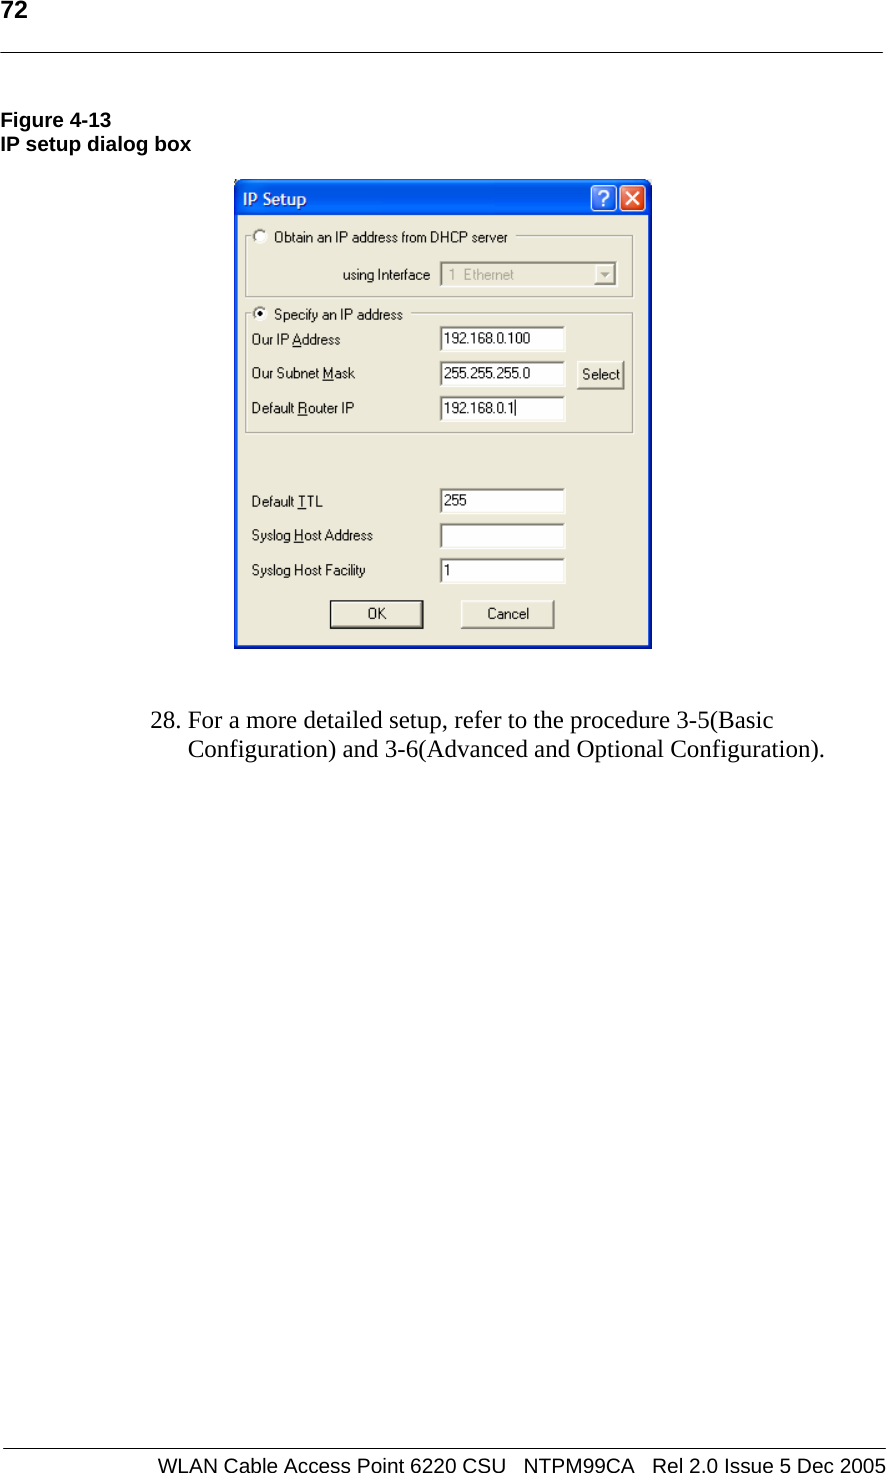   72  WLAN Cable Access Point 6220 CSU   NTPM99CA   Rel 2.0 Issue 5 Dec 2005 Figure 4-13 IP setup dialog box     28. For a more detailed setup, refer to the procedure 3-5(Basic Configuration) and 3-6(Advanced and Optional Configuration).     